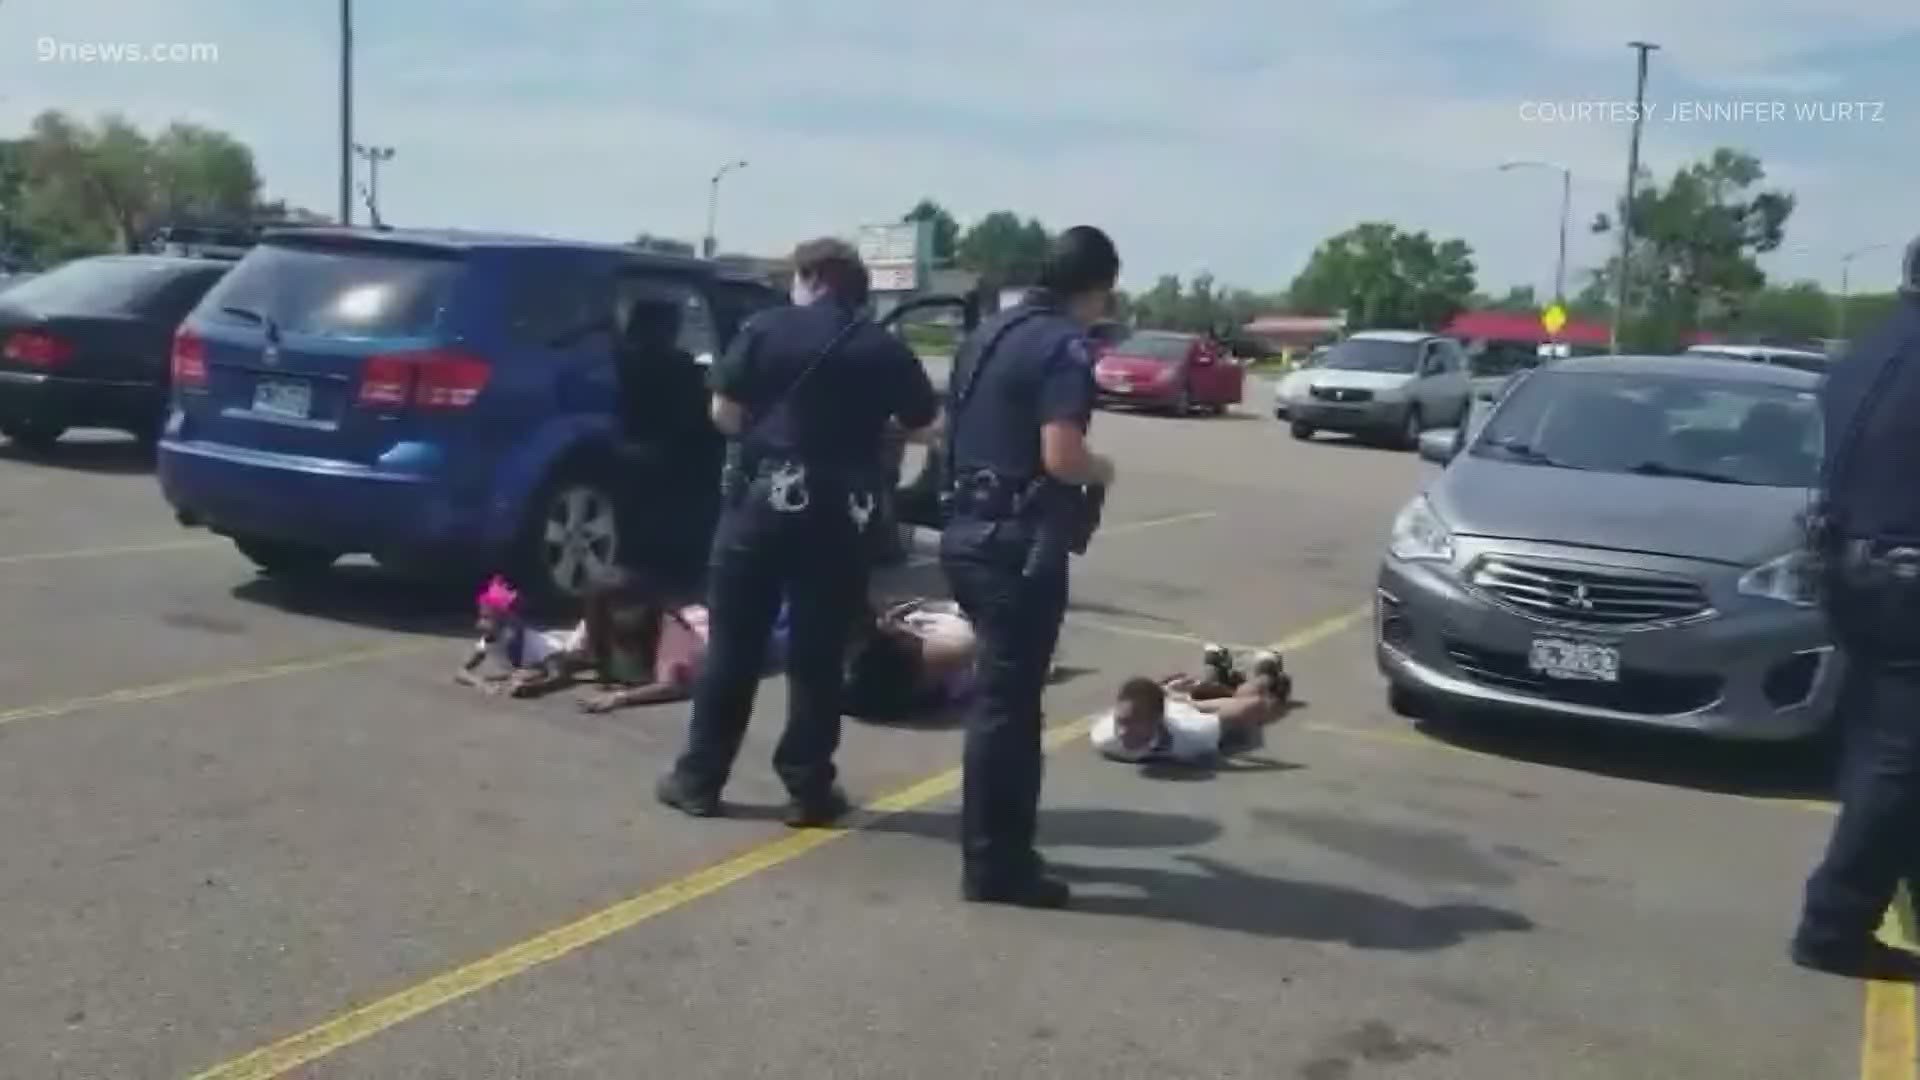 Police pulled over the wrong vehicle they thought was stolen; handcuffed and detained family, including a six-year-old girl.